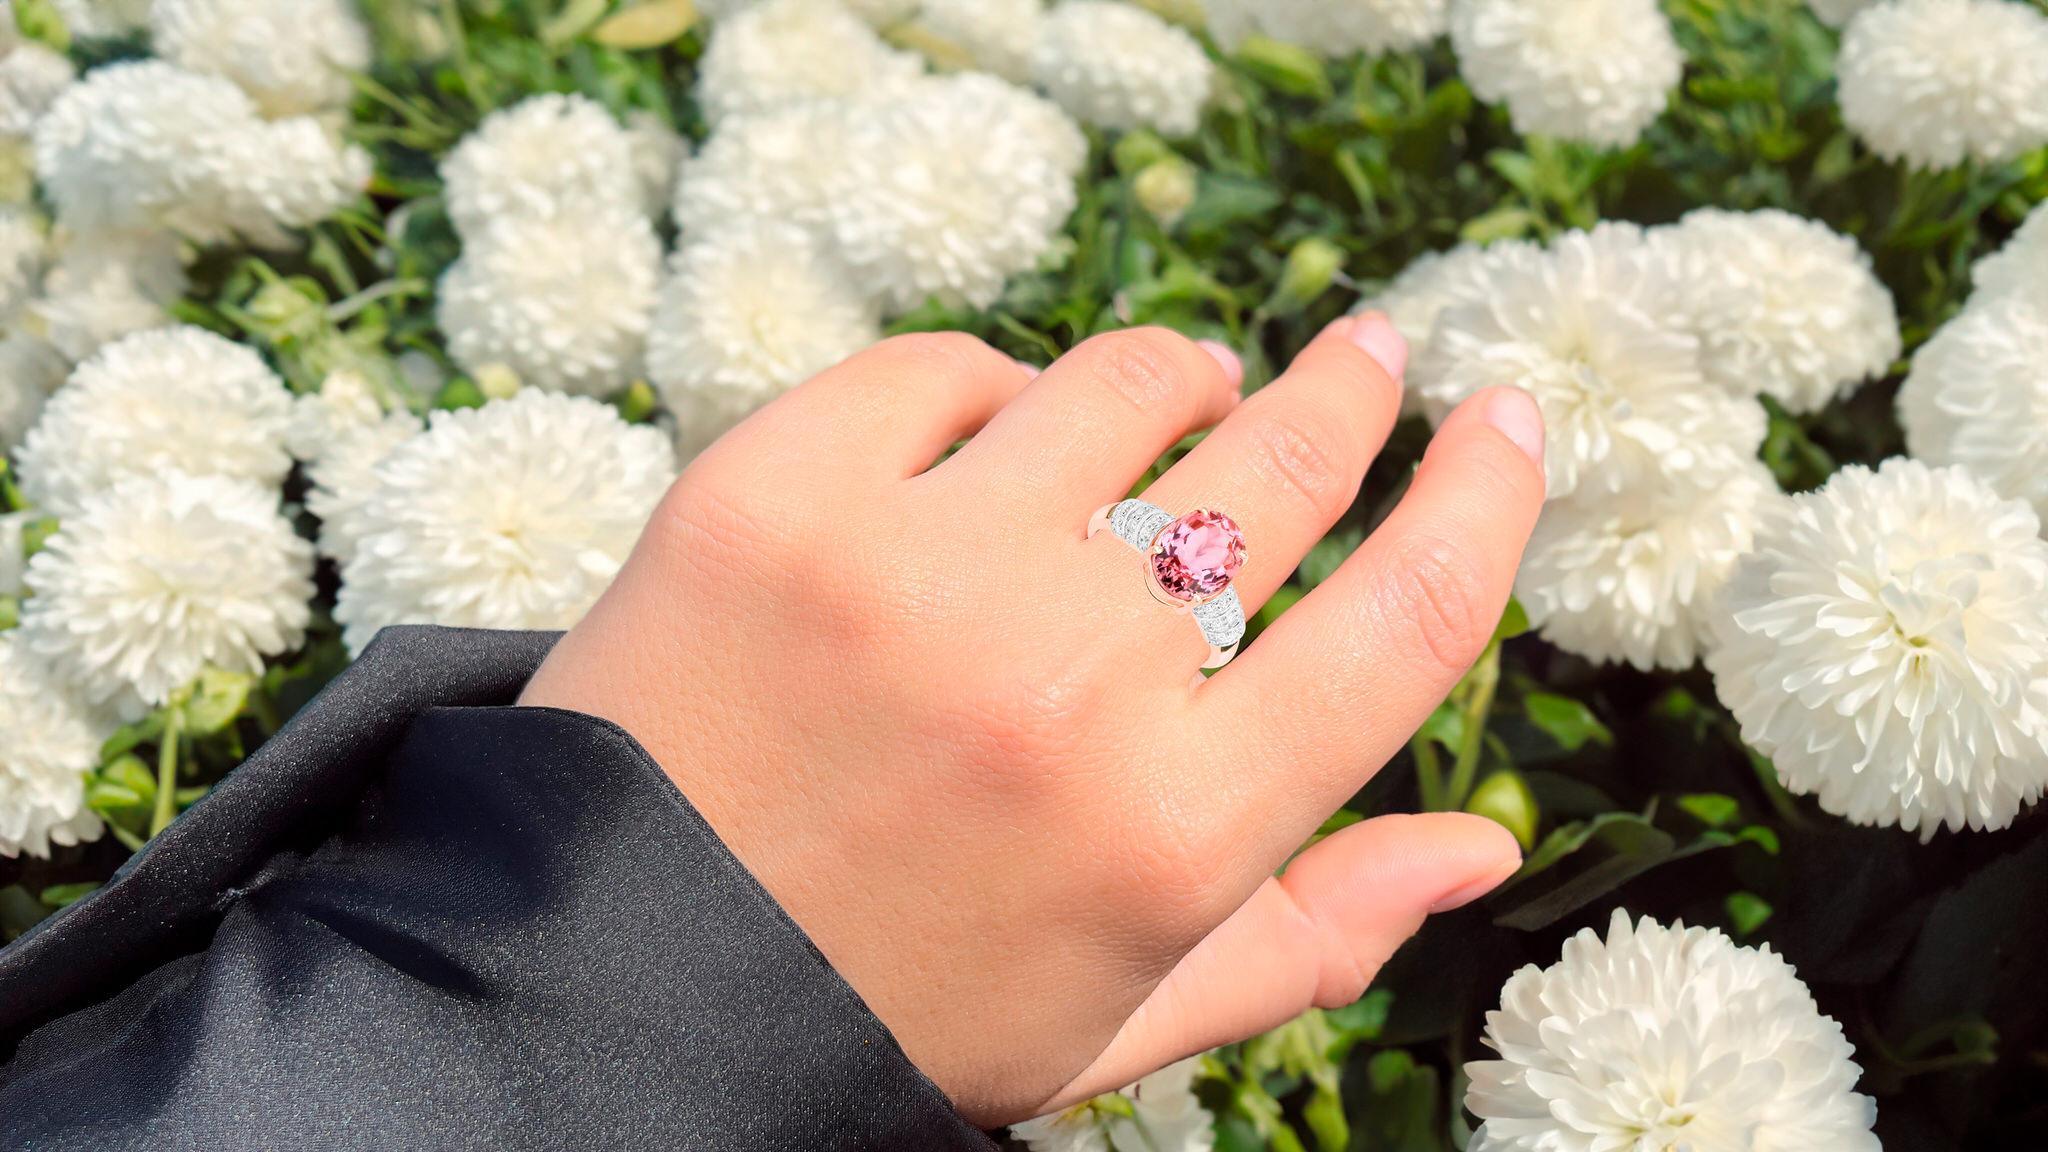 Oval Cut Natural Pink Tourmaline Cocktail Ring Diamond Setting 3.10 Carats 14K Rose Gold For Sale